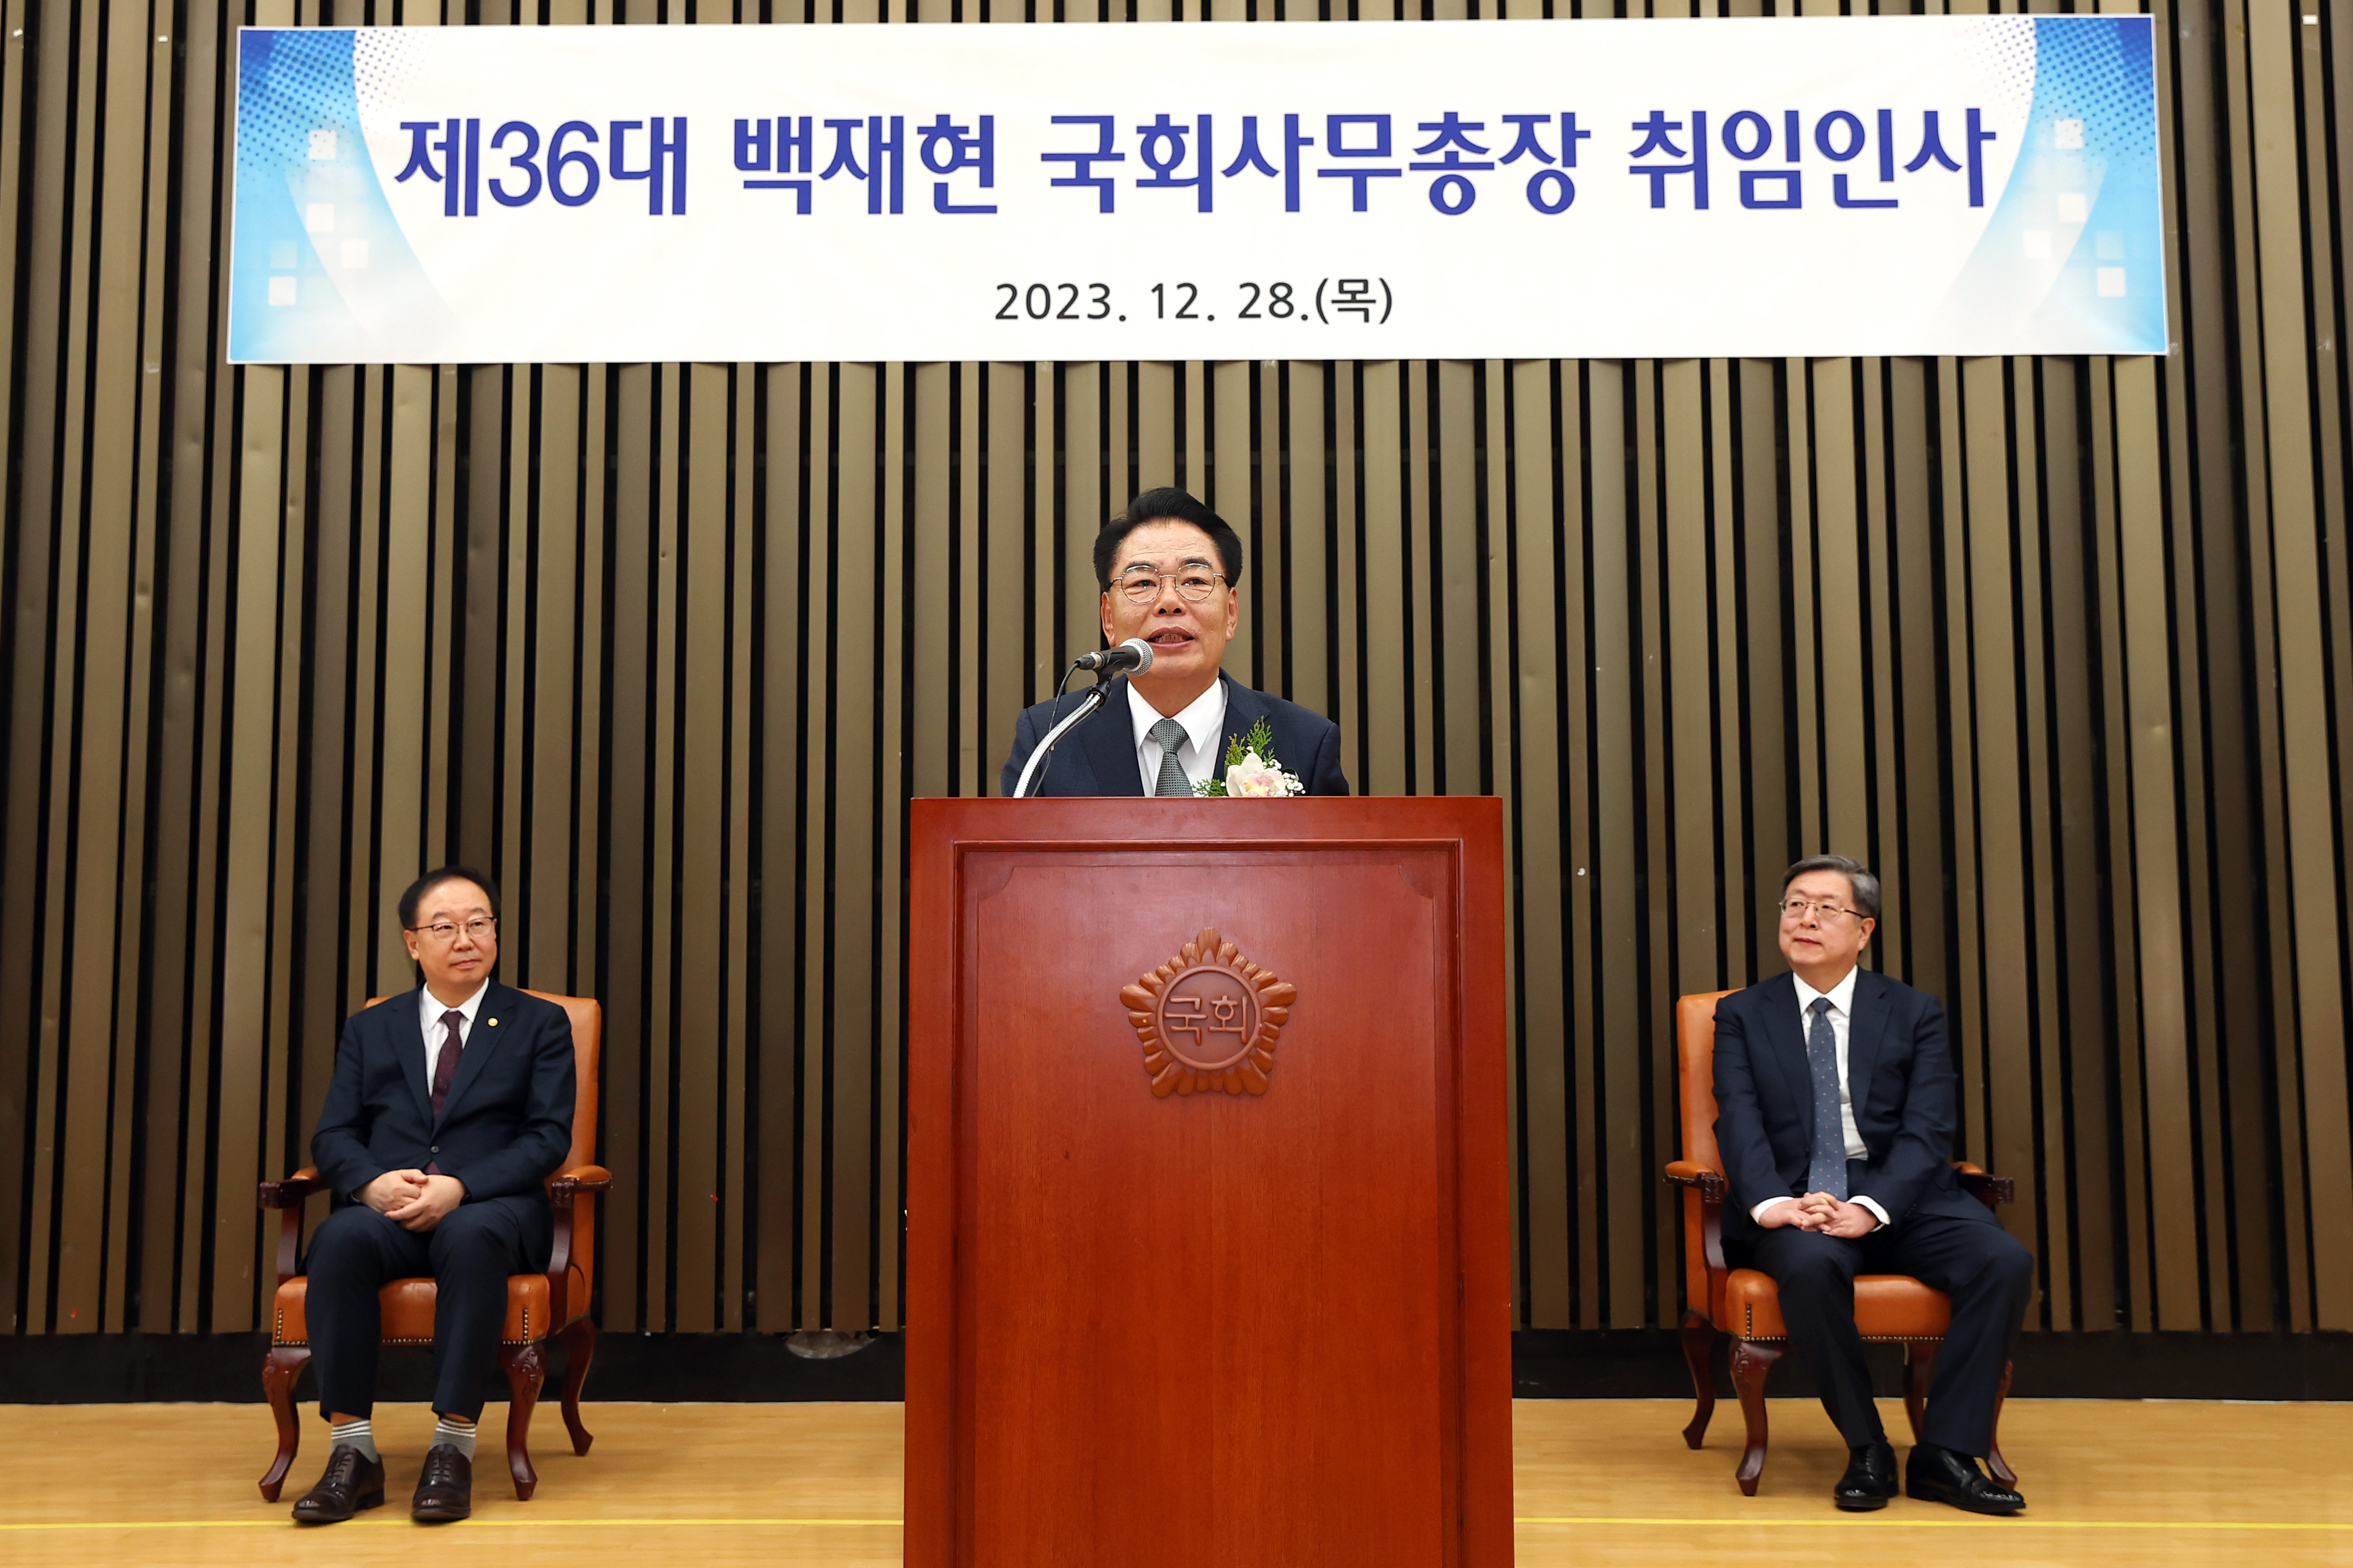 Inaugural Address of the 36th National Assembly Secretary General 관련사진 3 보기